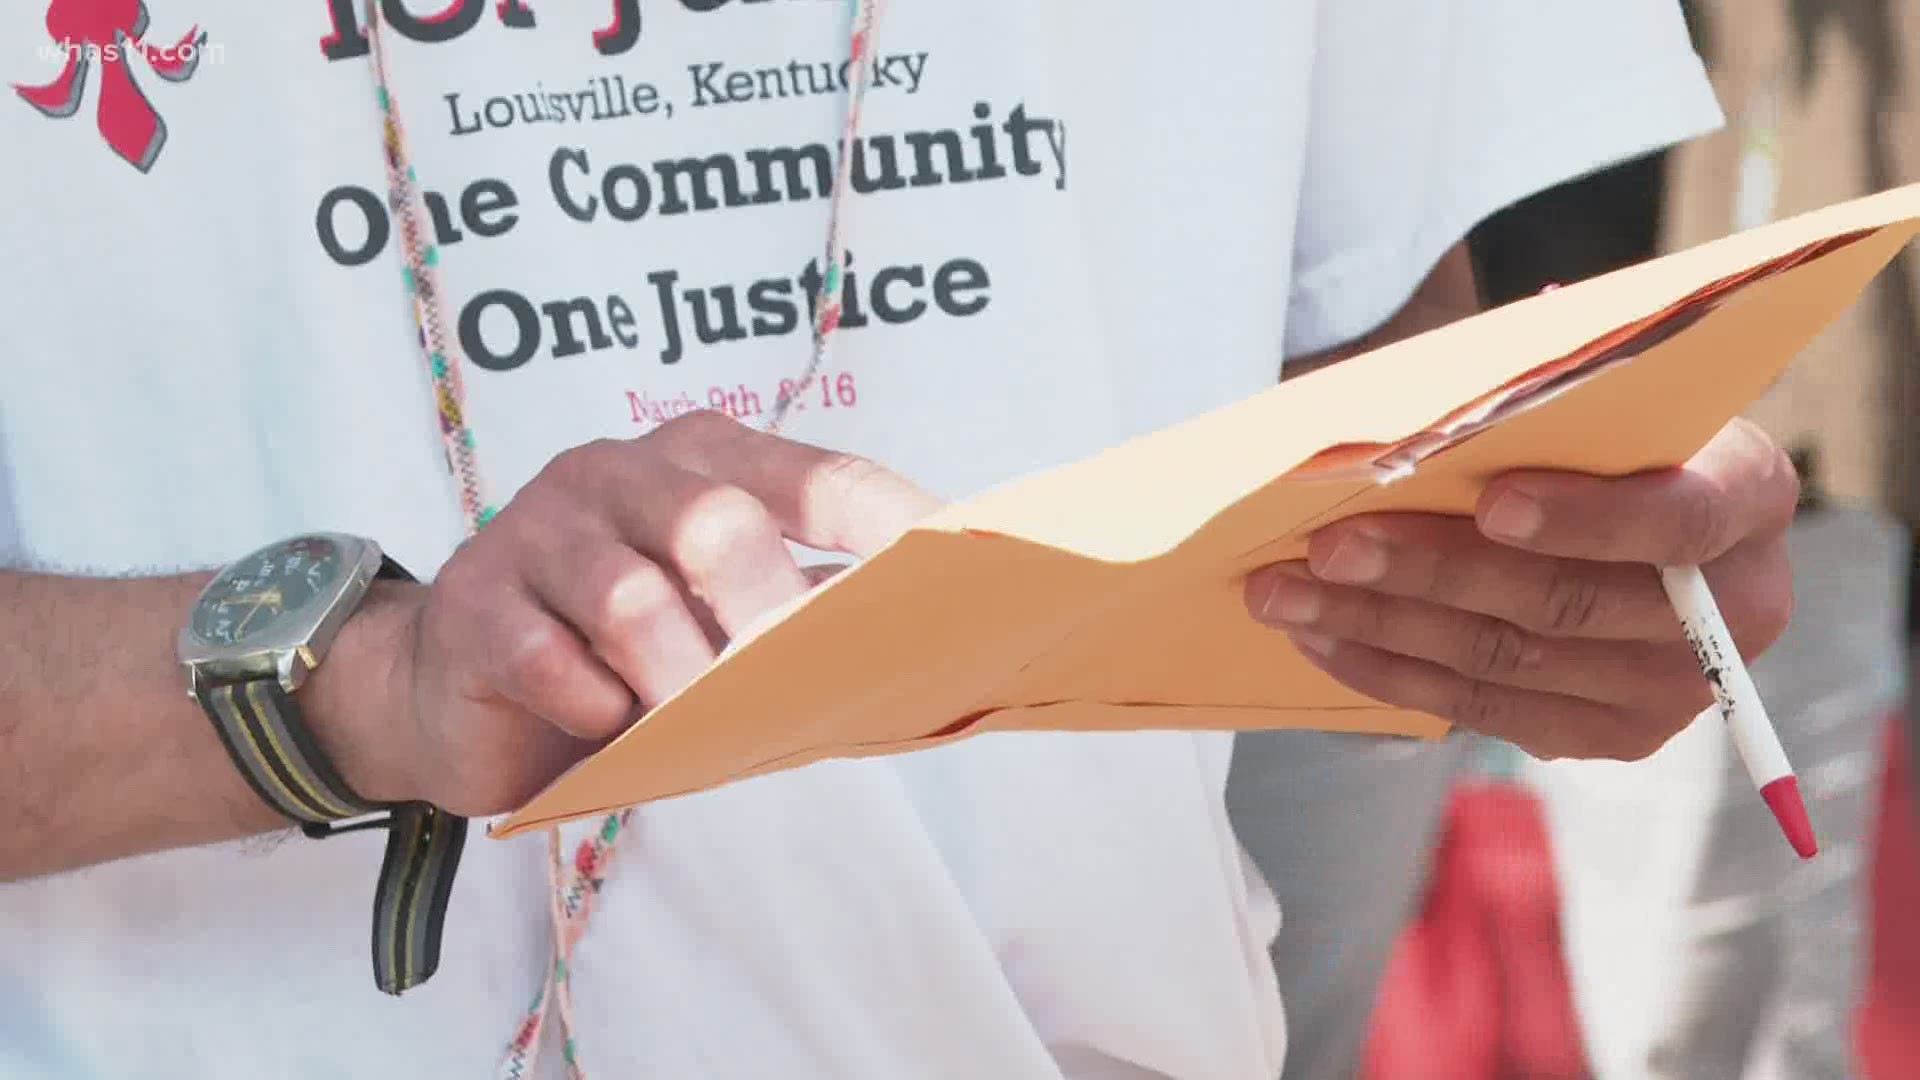 The group is calling for changes within Louisville police and a partial de-funding of the department.